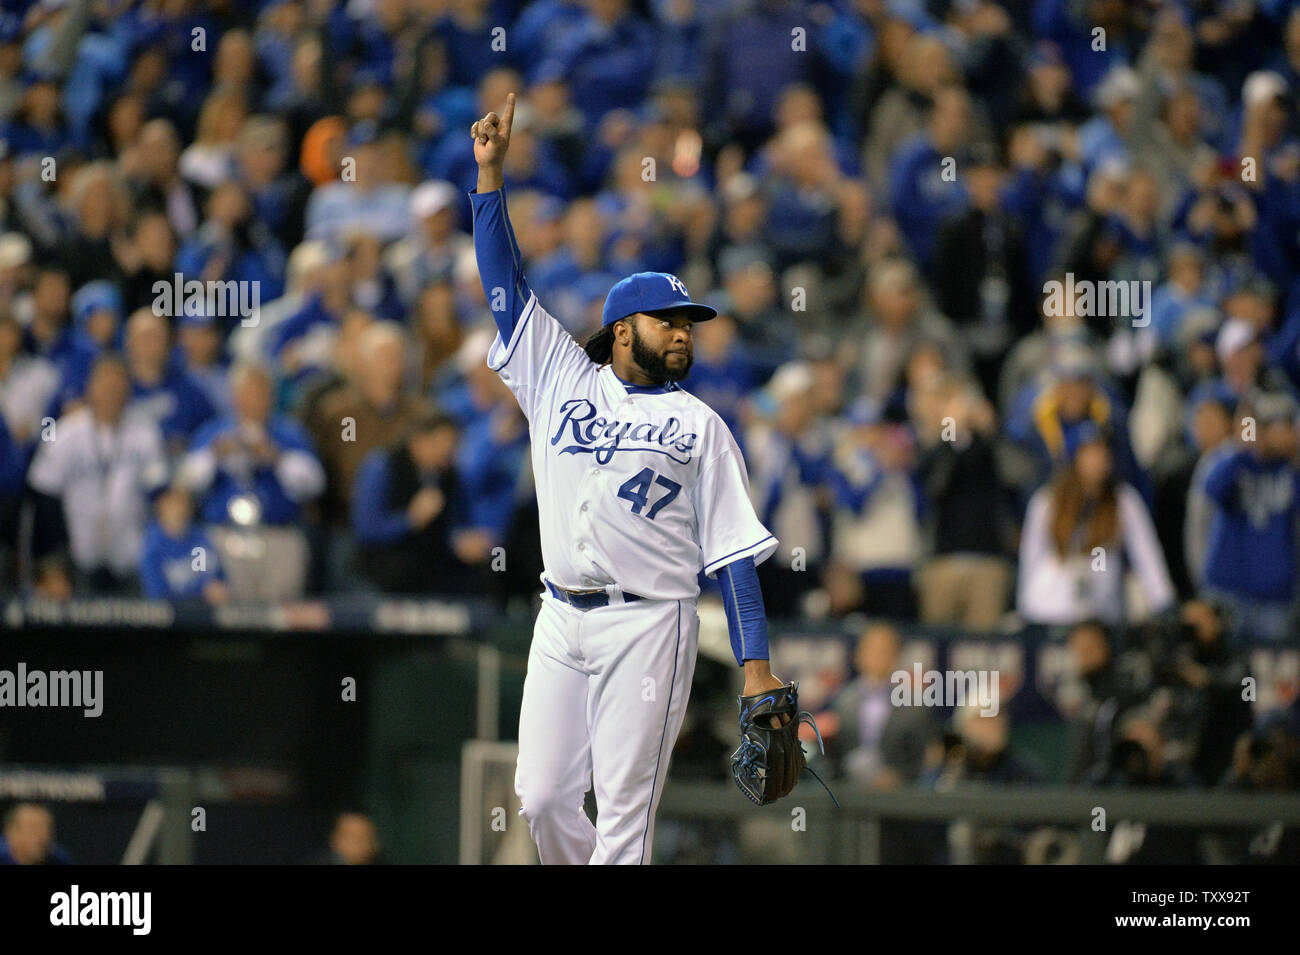 Kansas City Royals starting pitcher Johnny Cueto celebrates defeating the New York Mets 7-1 with a complete game in game 2 of the World Series at Kauffman Stadium in Kansas City, Missouri on October 28, 2015. The Royals go up 2-0 in the Series.      Photo by Kevin Dietsch/UPI Stock Photo